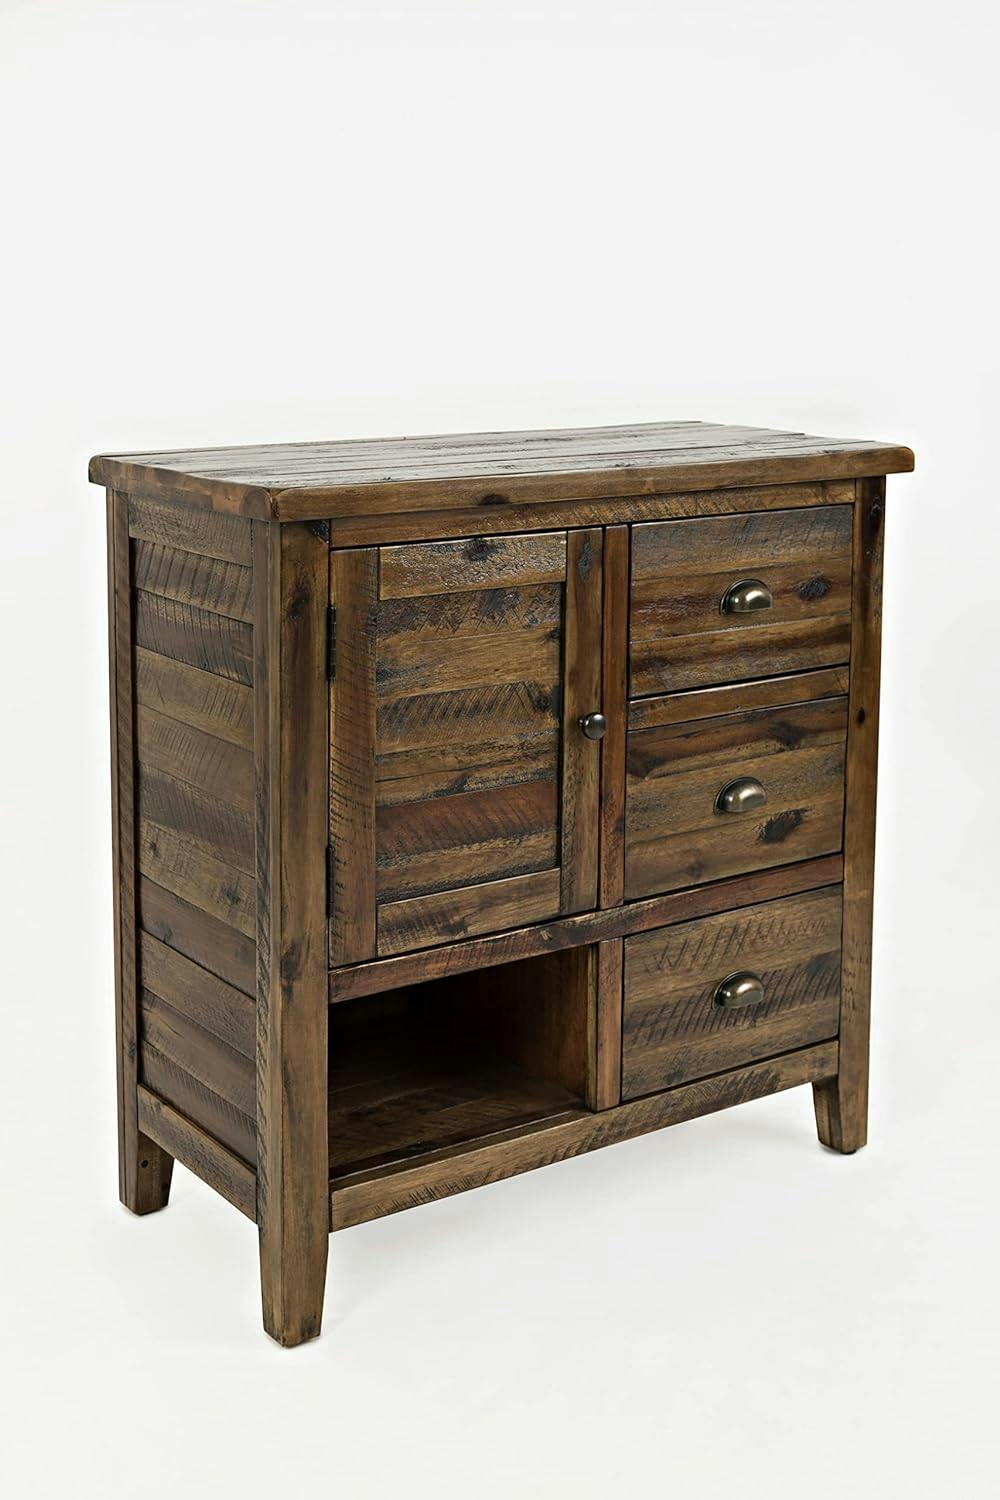 Rustic Dakota Oak 3-Drawer Accent Chest with Metal Cup Pulls